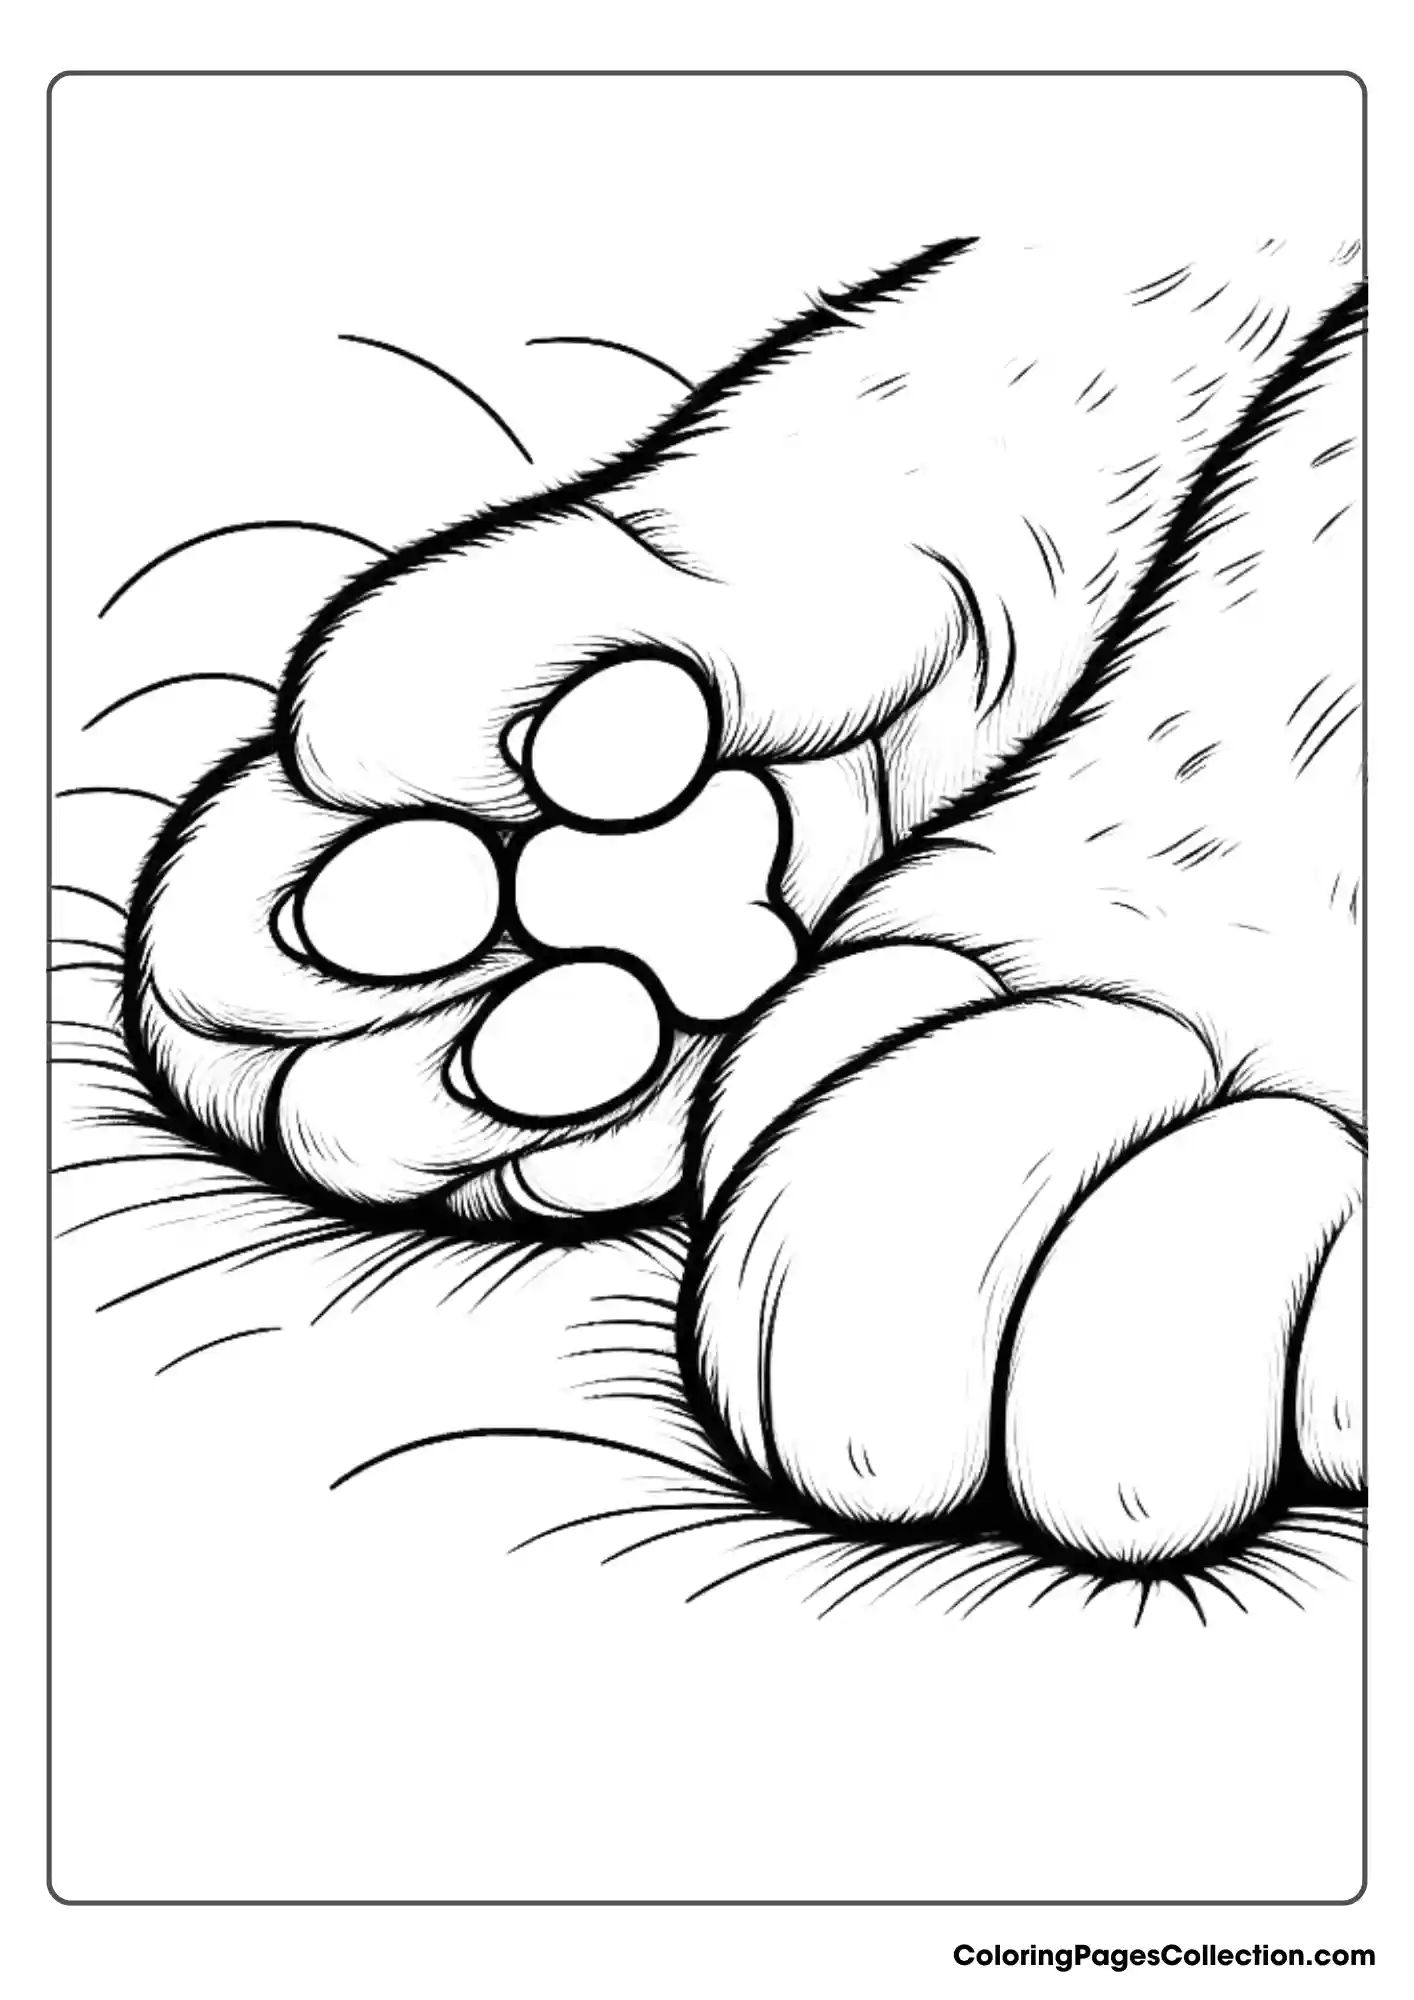 Close-up Of A Cat's Paws